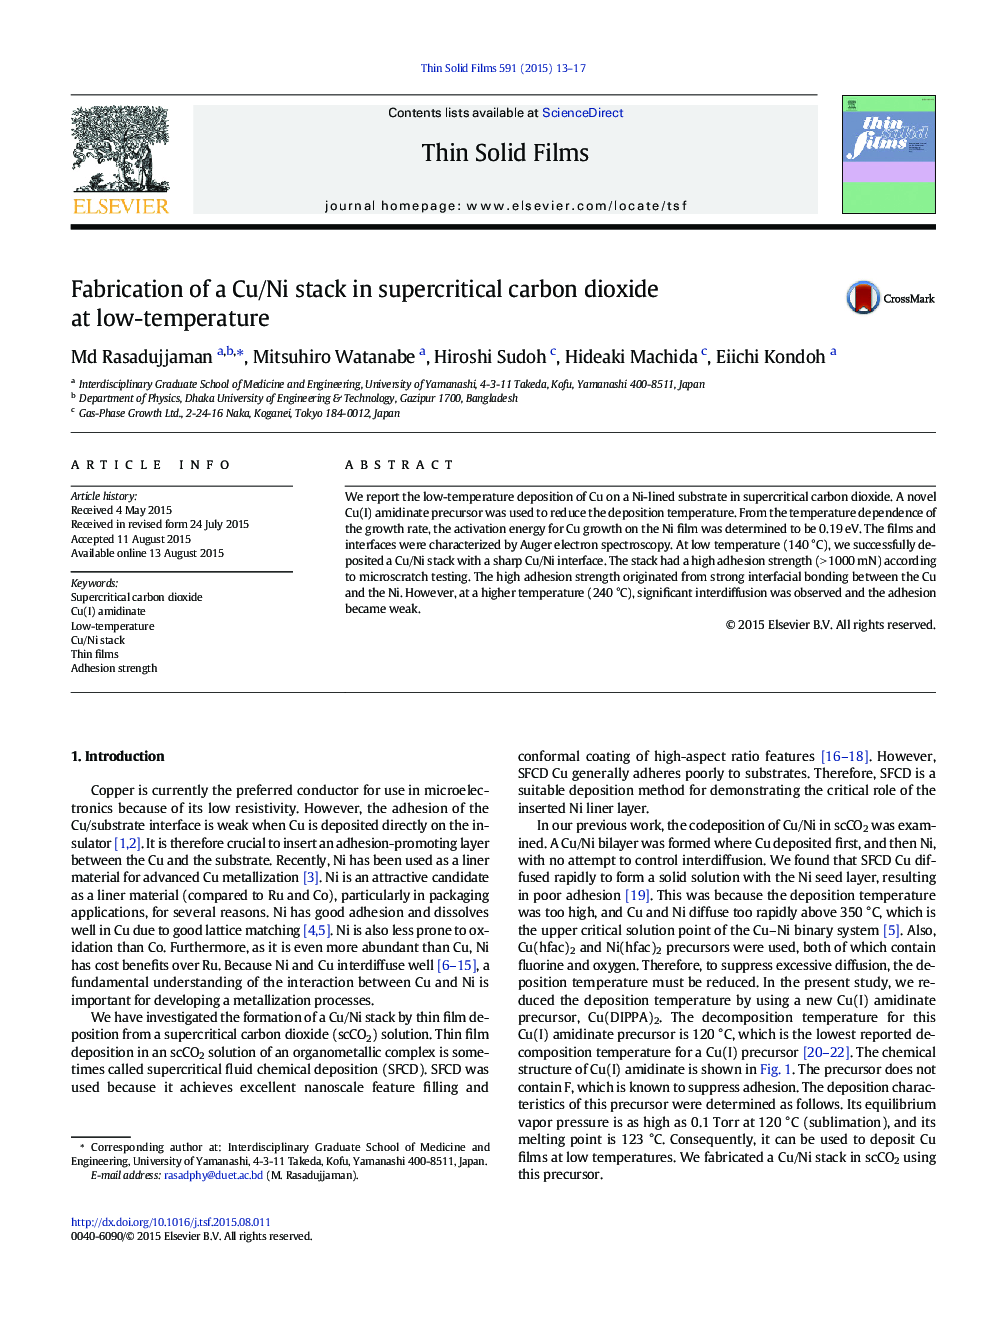 Fabrication of a Cu/Ni stack in supercritical carbon dioxide at low-temperature